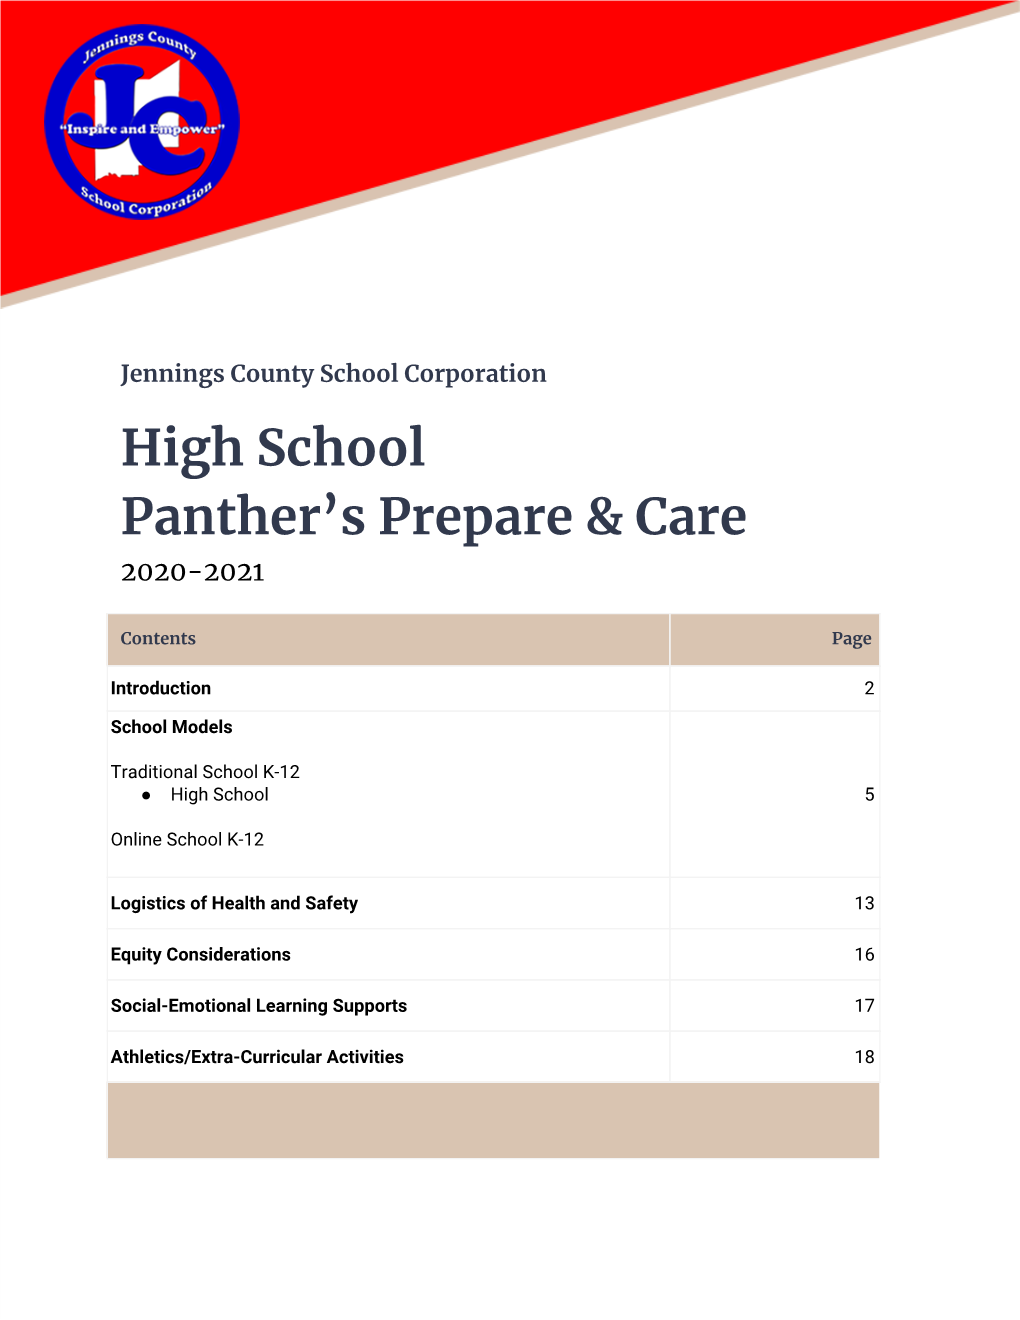 High School Panther's Prepare & Care